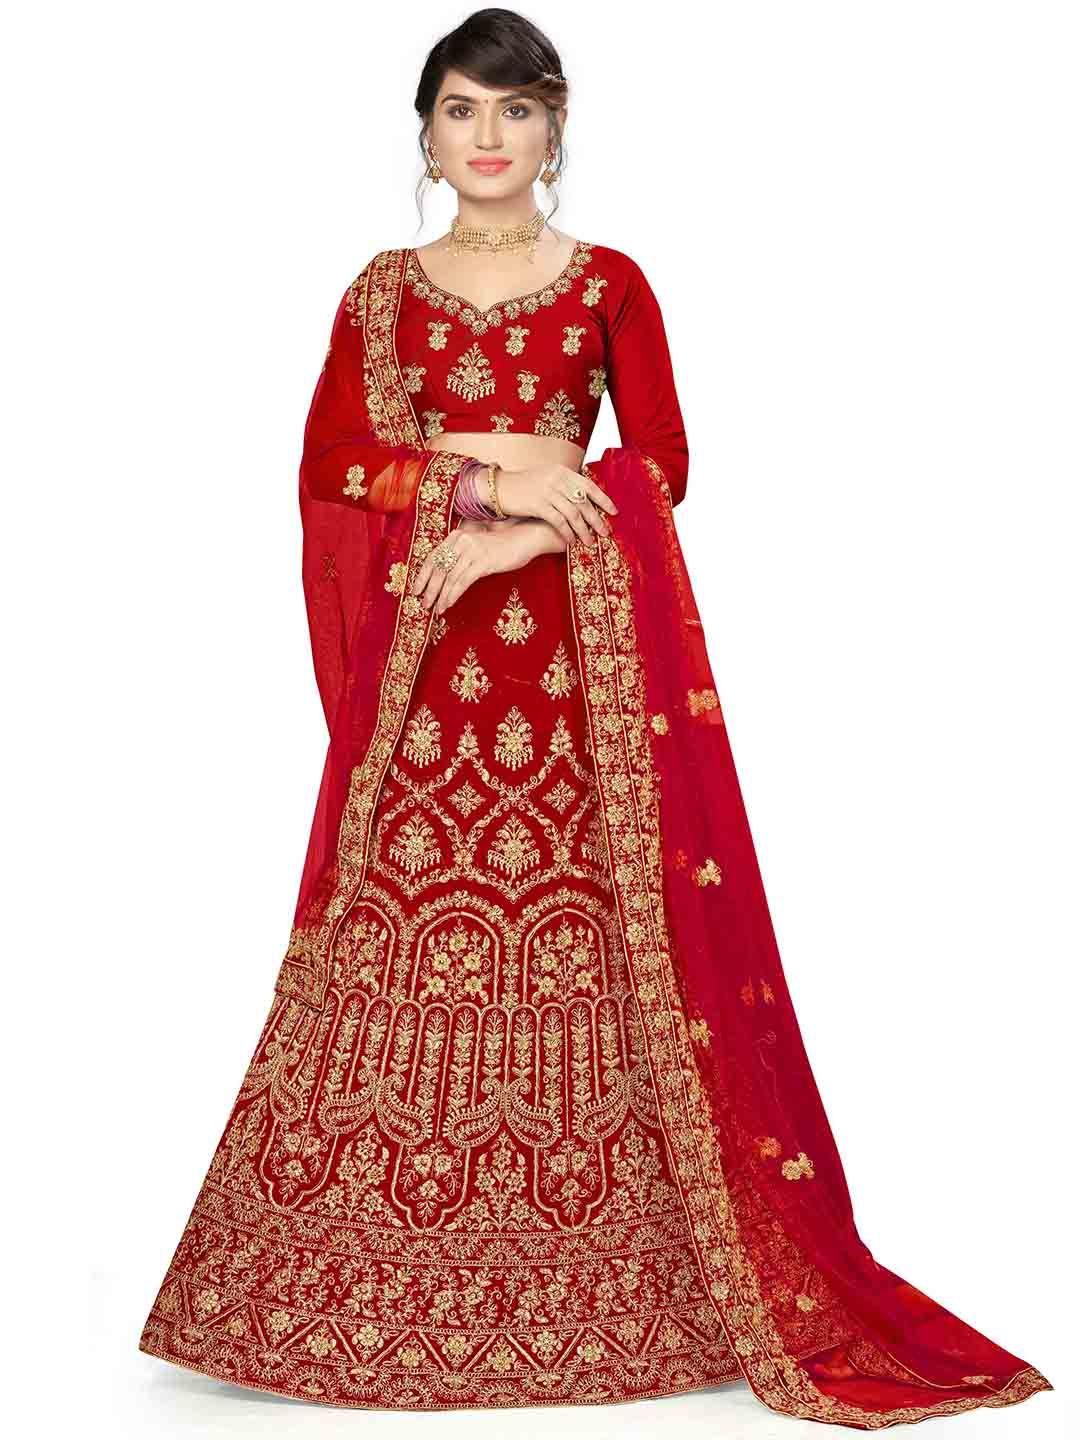 manvaa embroidered thread work semi-stitched lehenga & unstitched blouse with dupatta